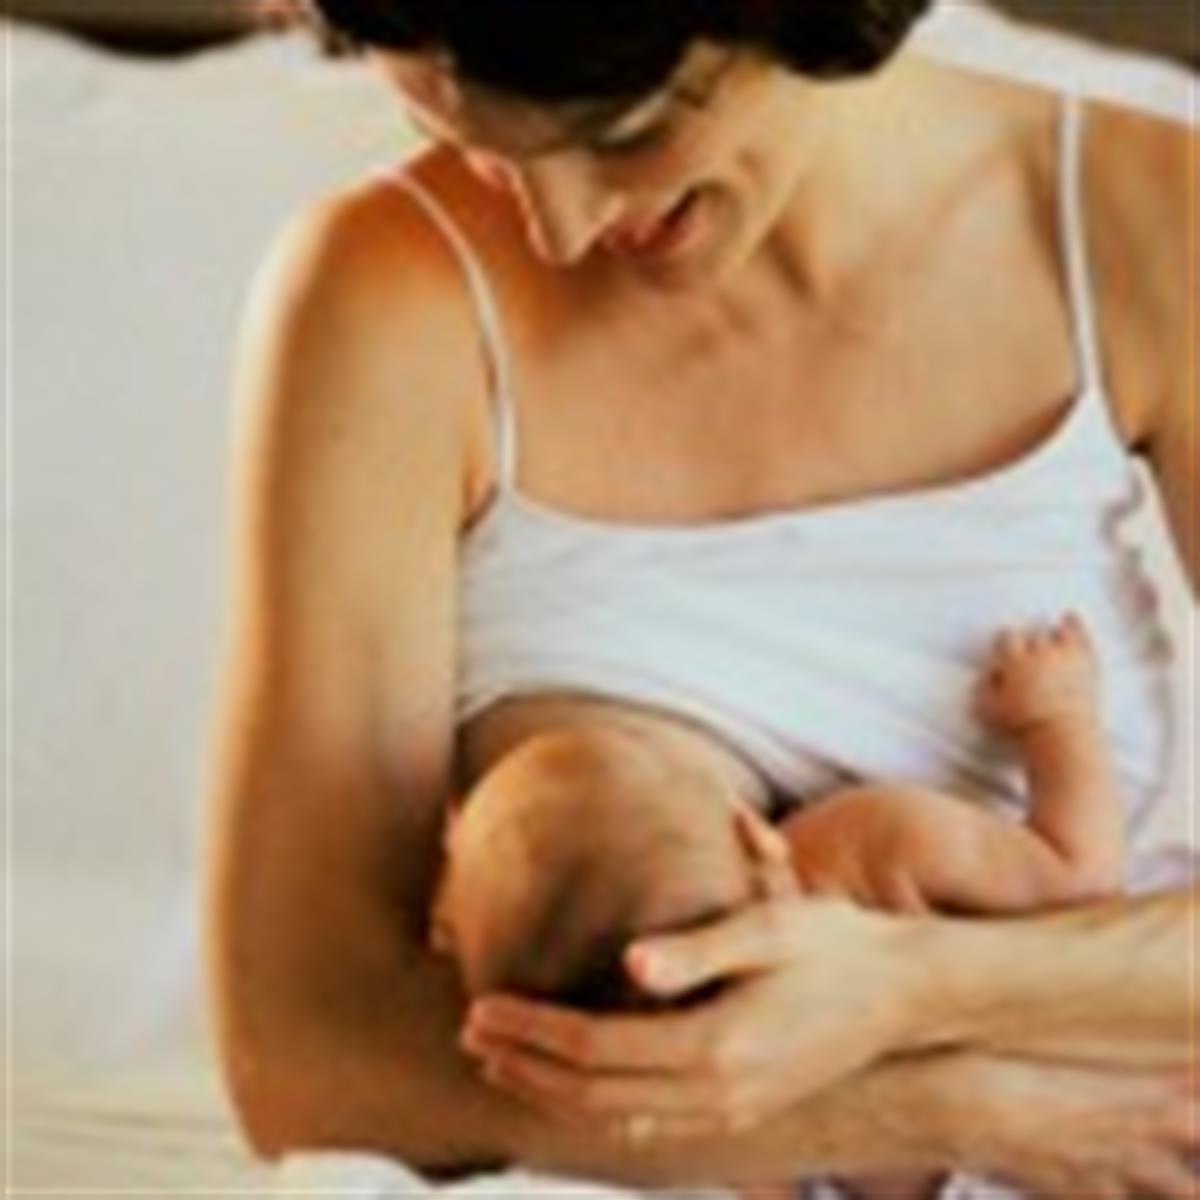 Different from active breastfeeding, comfort nursing, also known as  non-nutritive sucking, is when a baby is latched at the breast, but